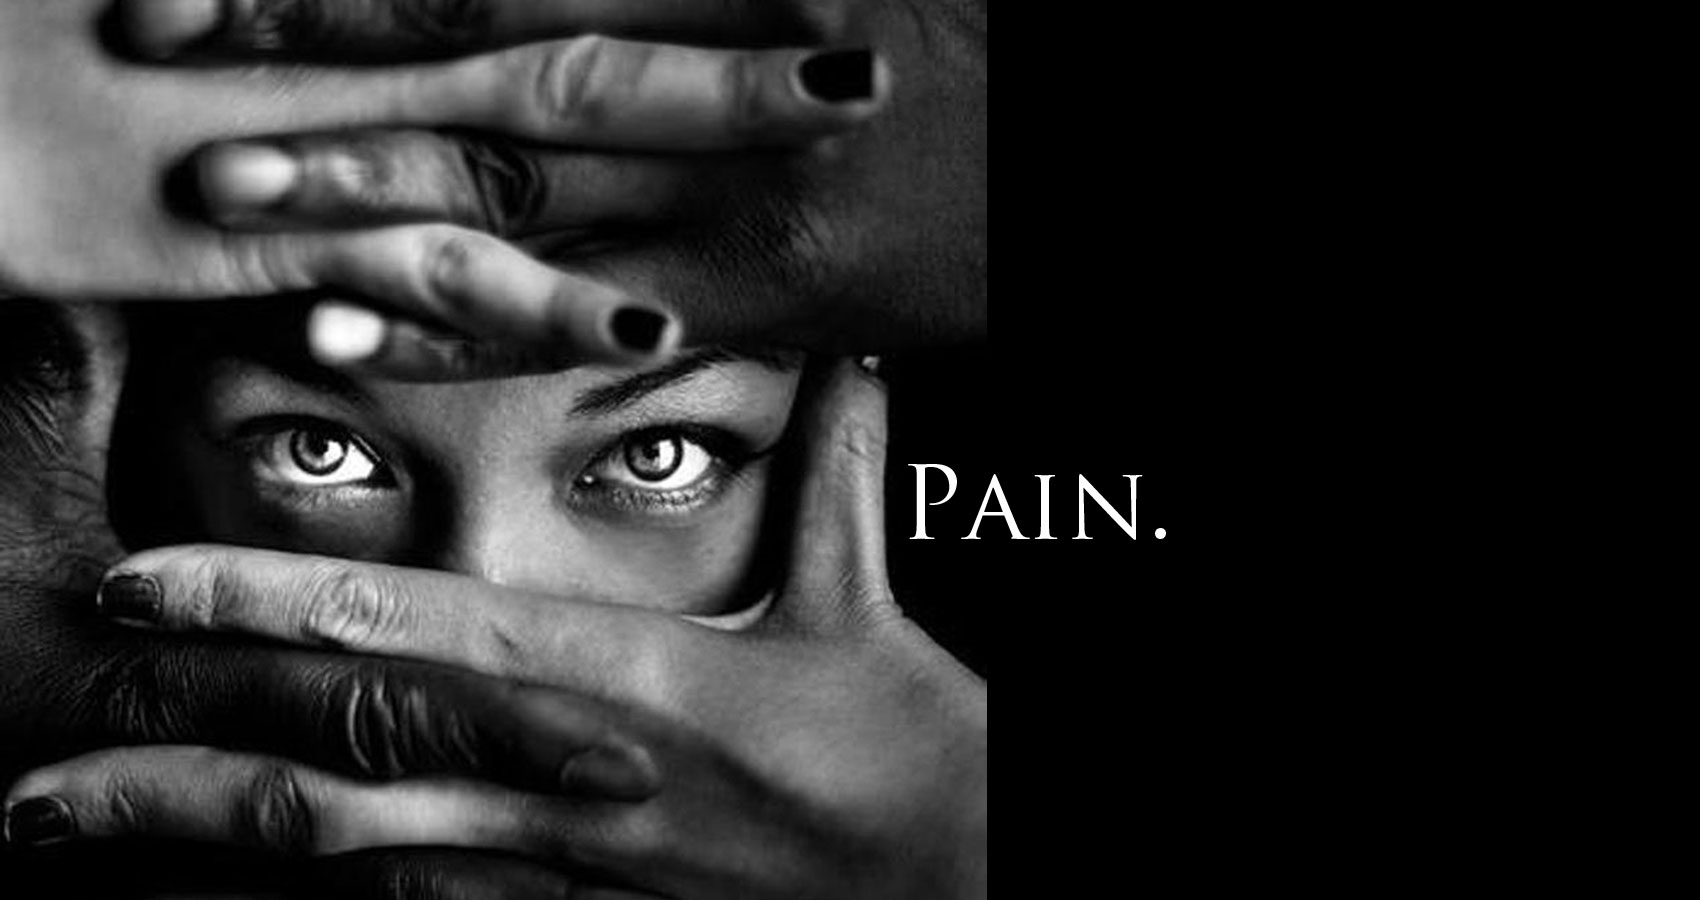 Pain. at Spillwords.com